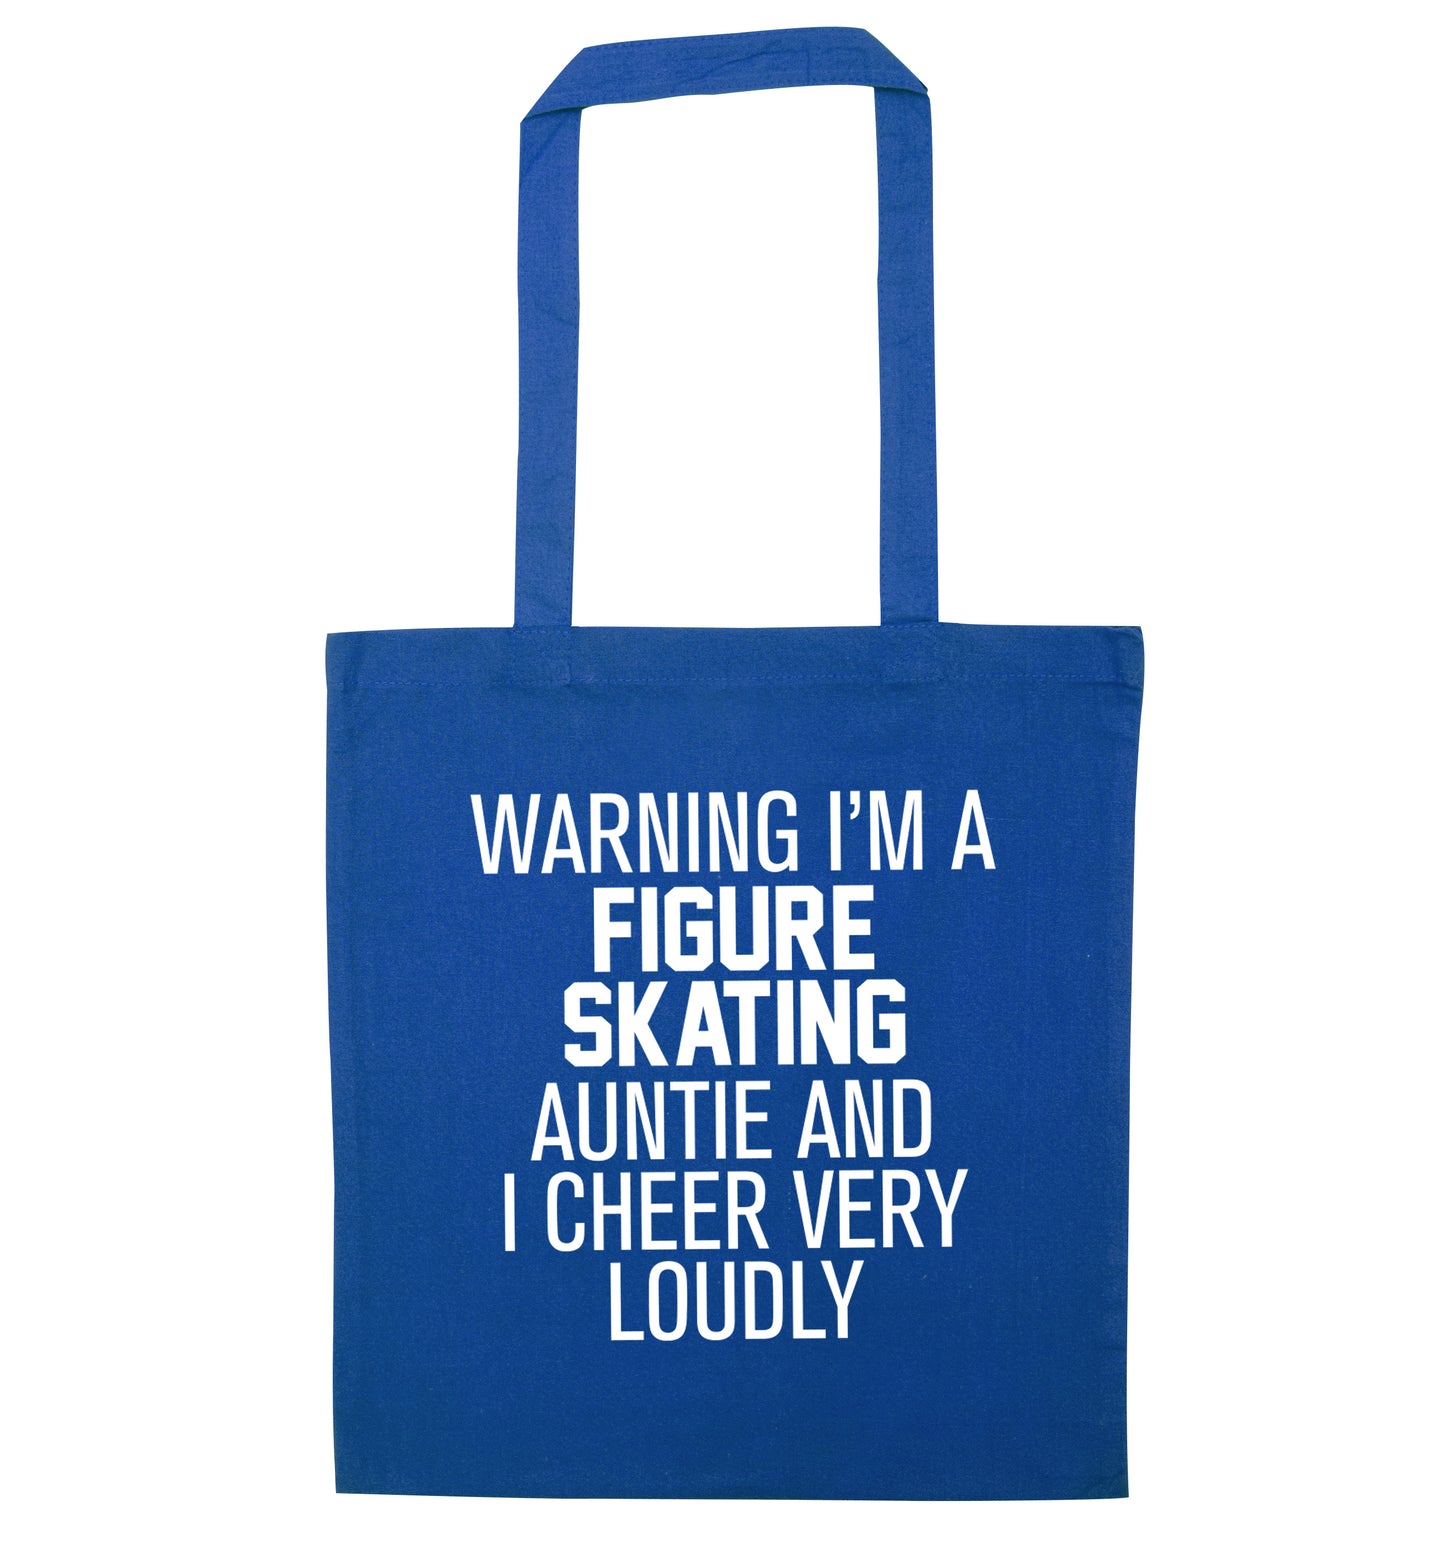 Warning I'm a figure skating auntie and I cheer very loudly blue tote bag